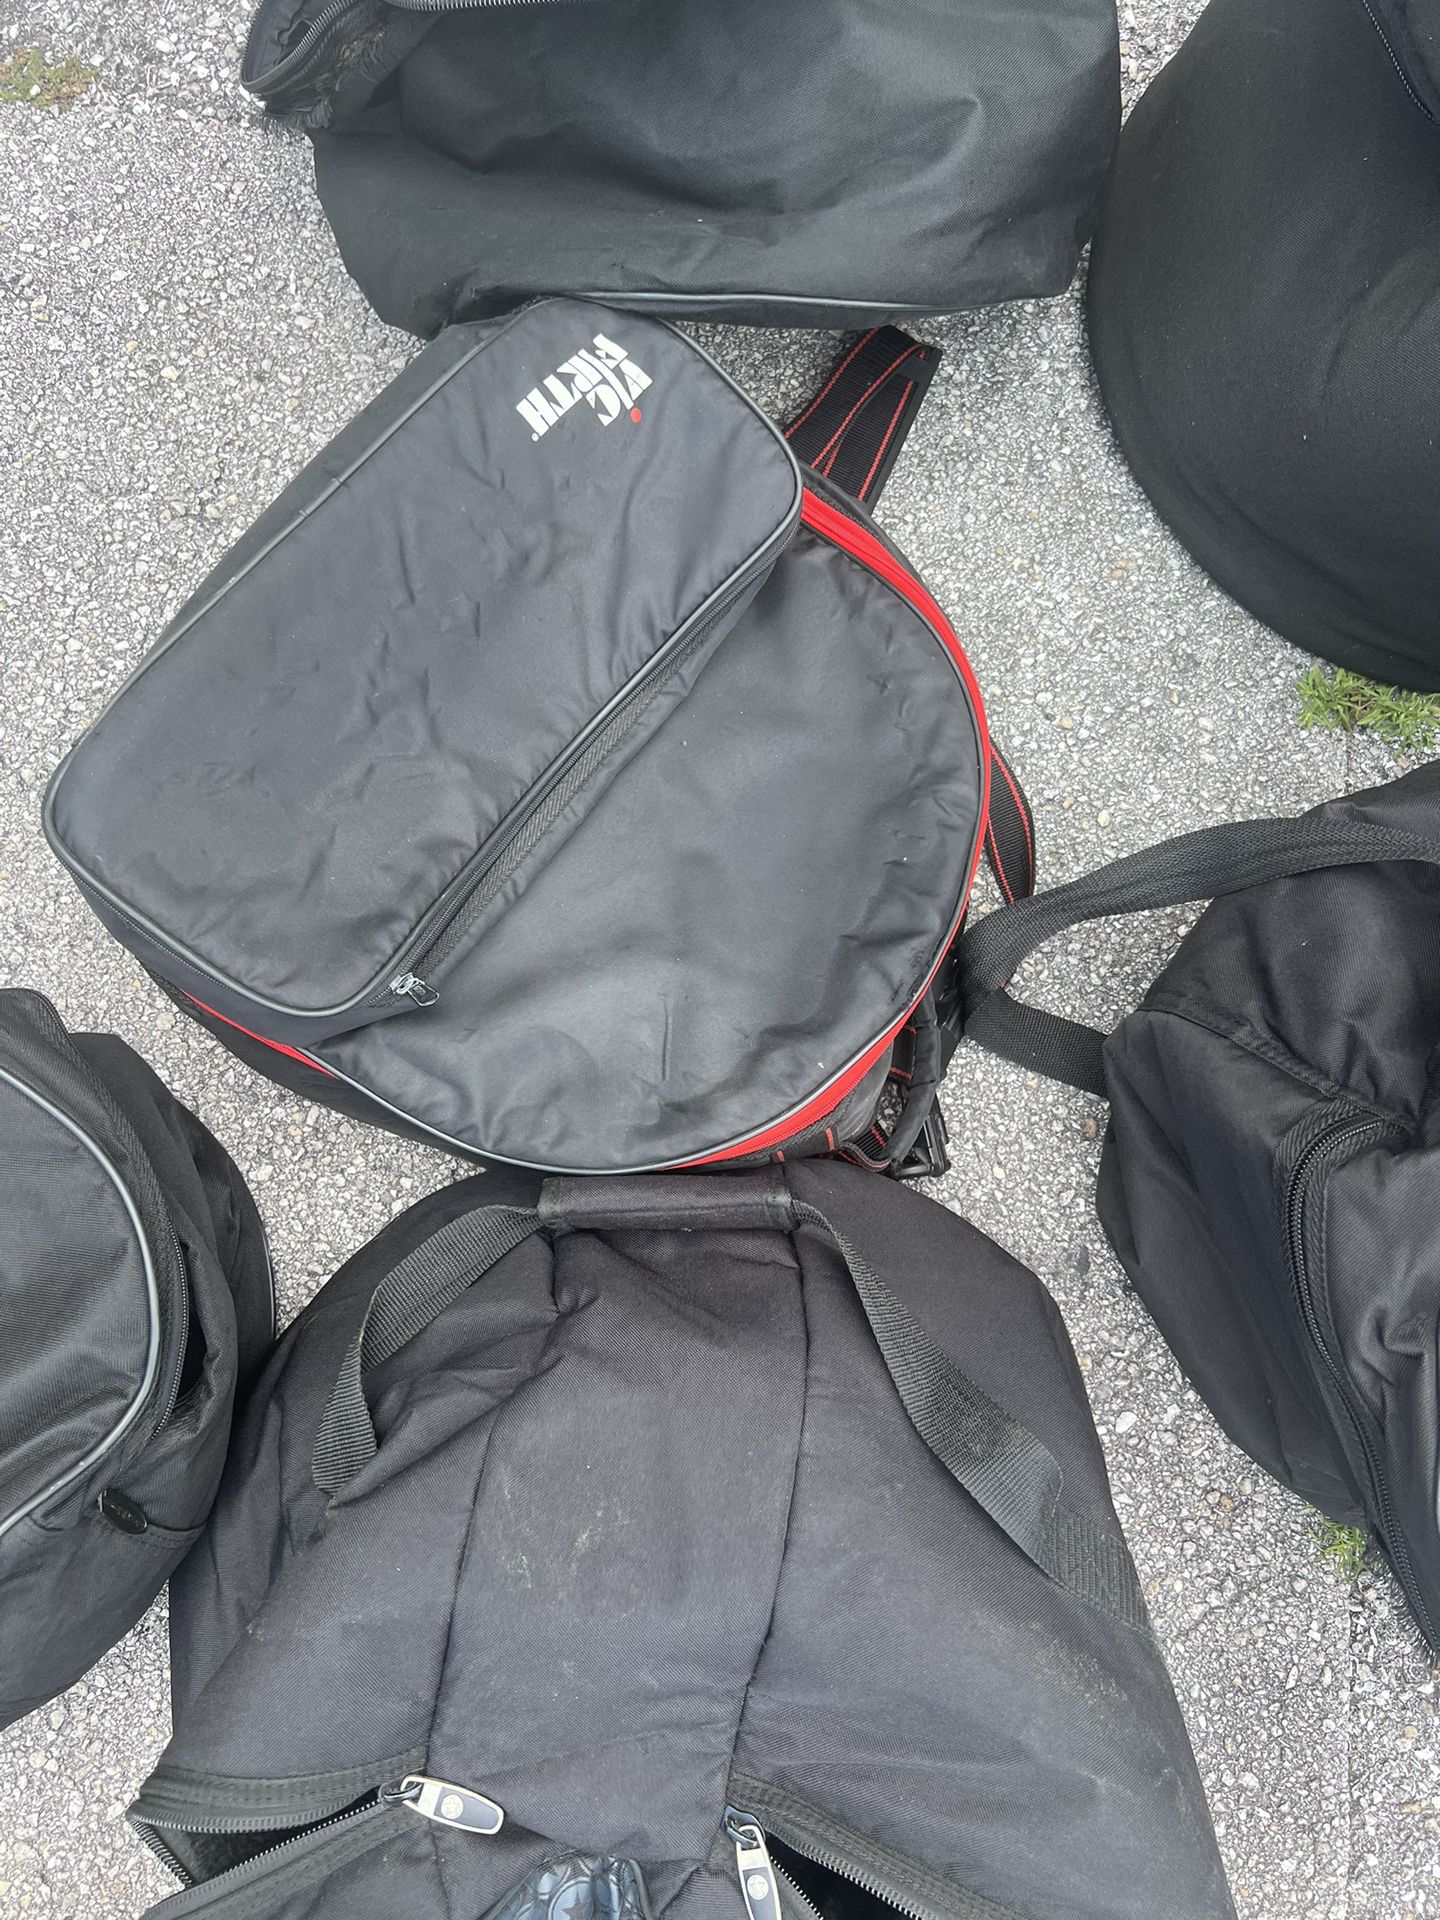 Drum Bags (Variety of Sizes)